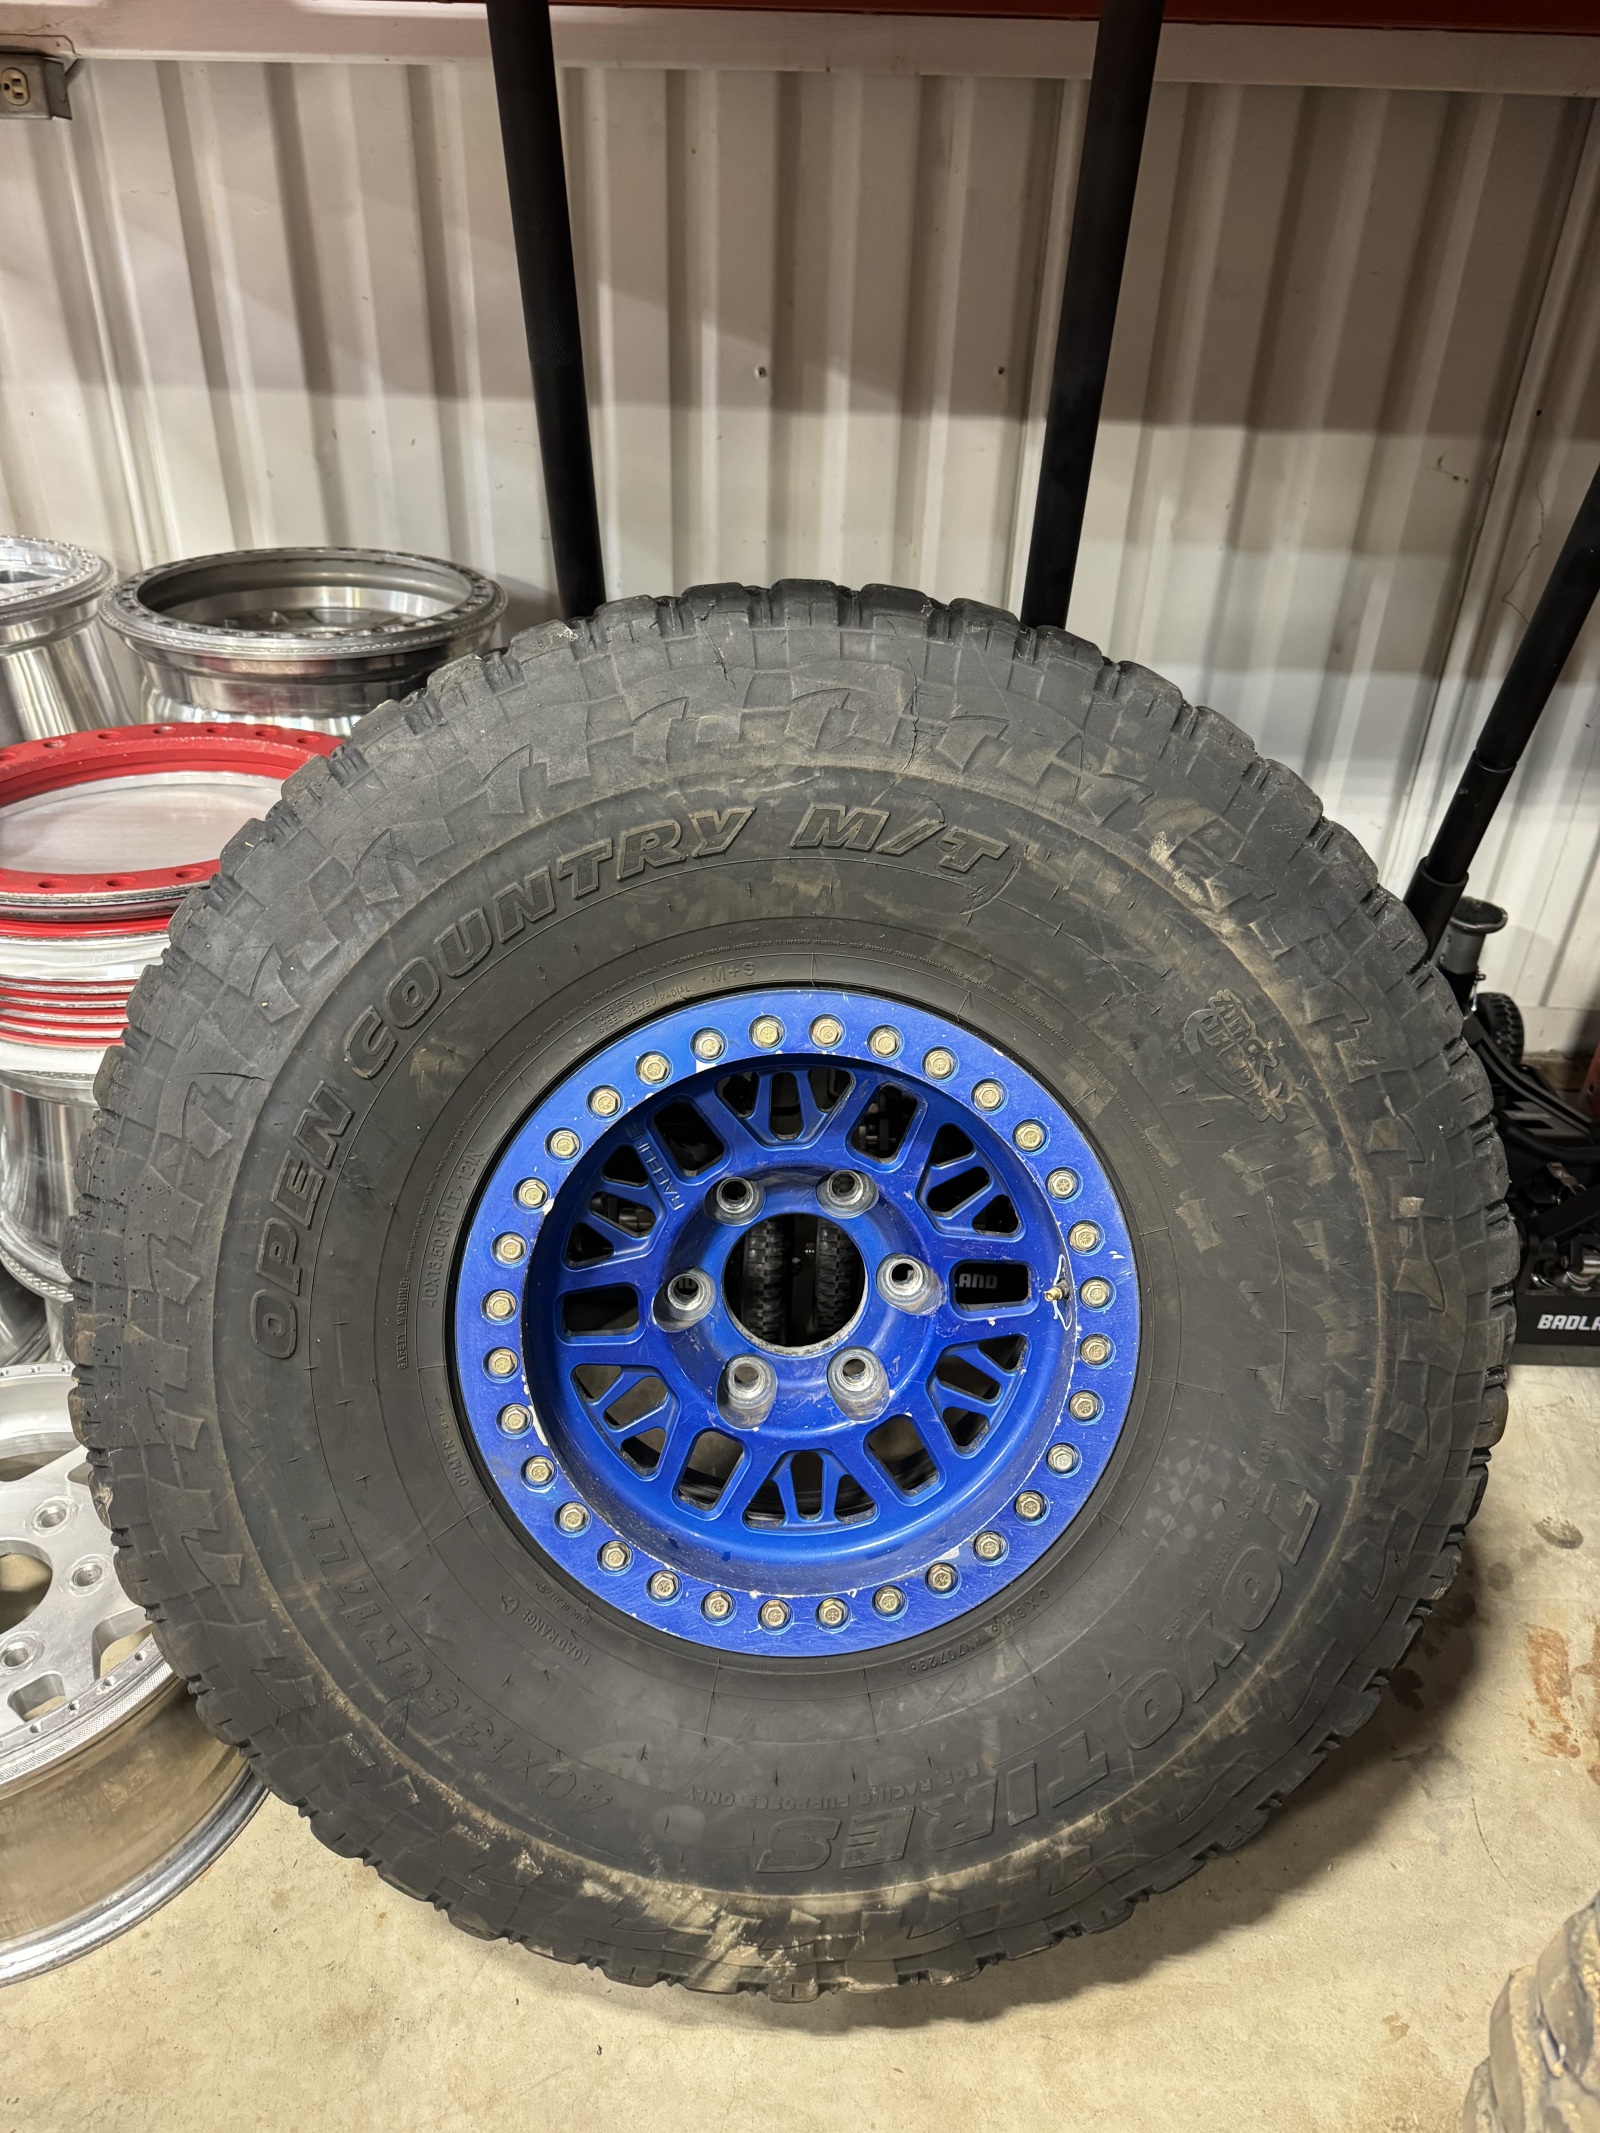 For Sale: 6 - Raceline Forged Wheels 6x6.5 on Toyo MT 40s - photo8